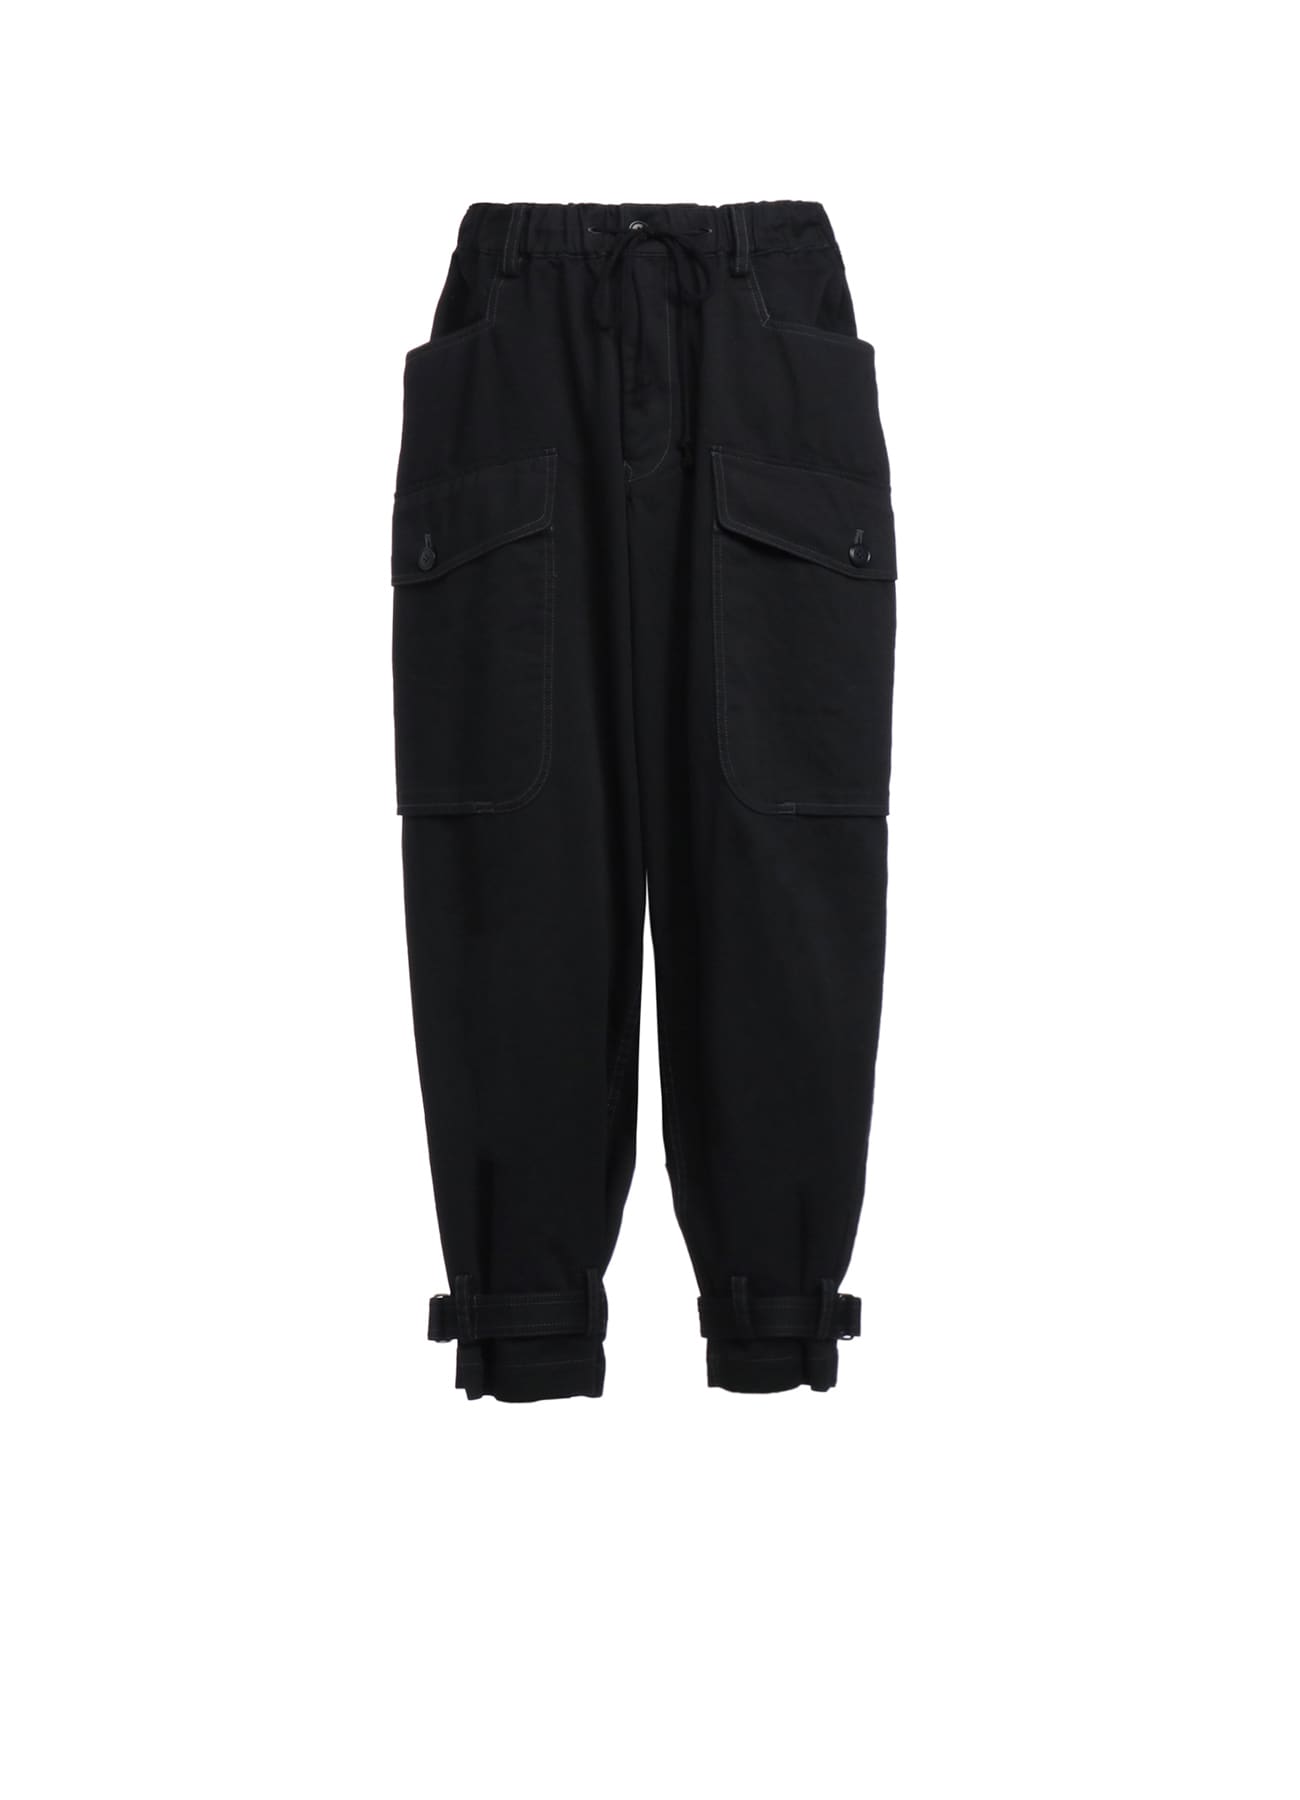 COTTON DRILL CARGO PANTS WITH BELTED HEMS(M Black): S'YTE｜THE 